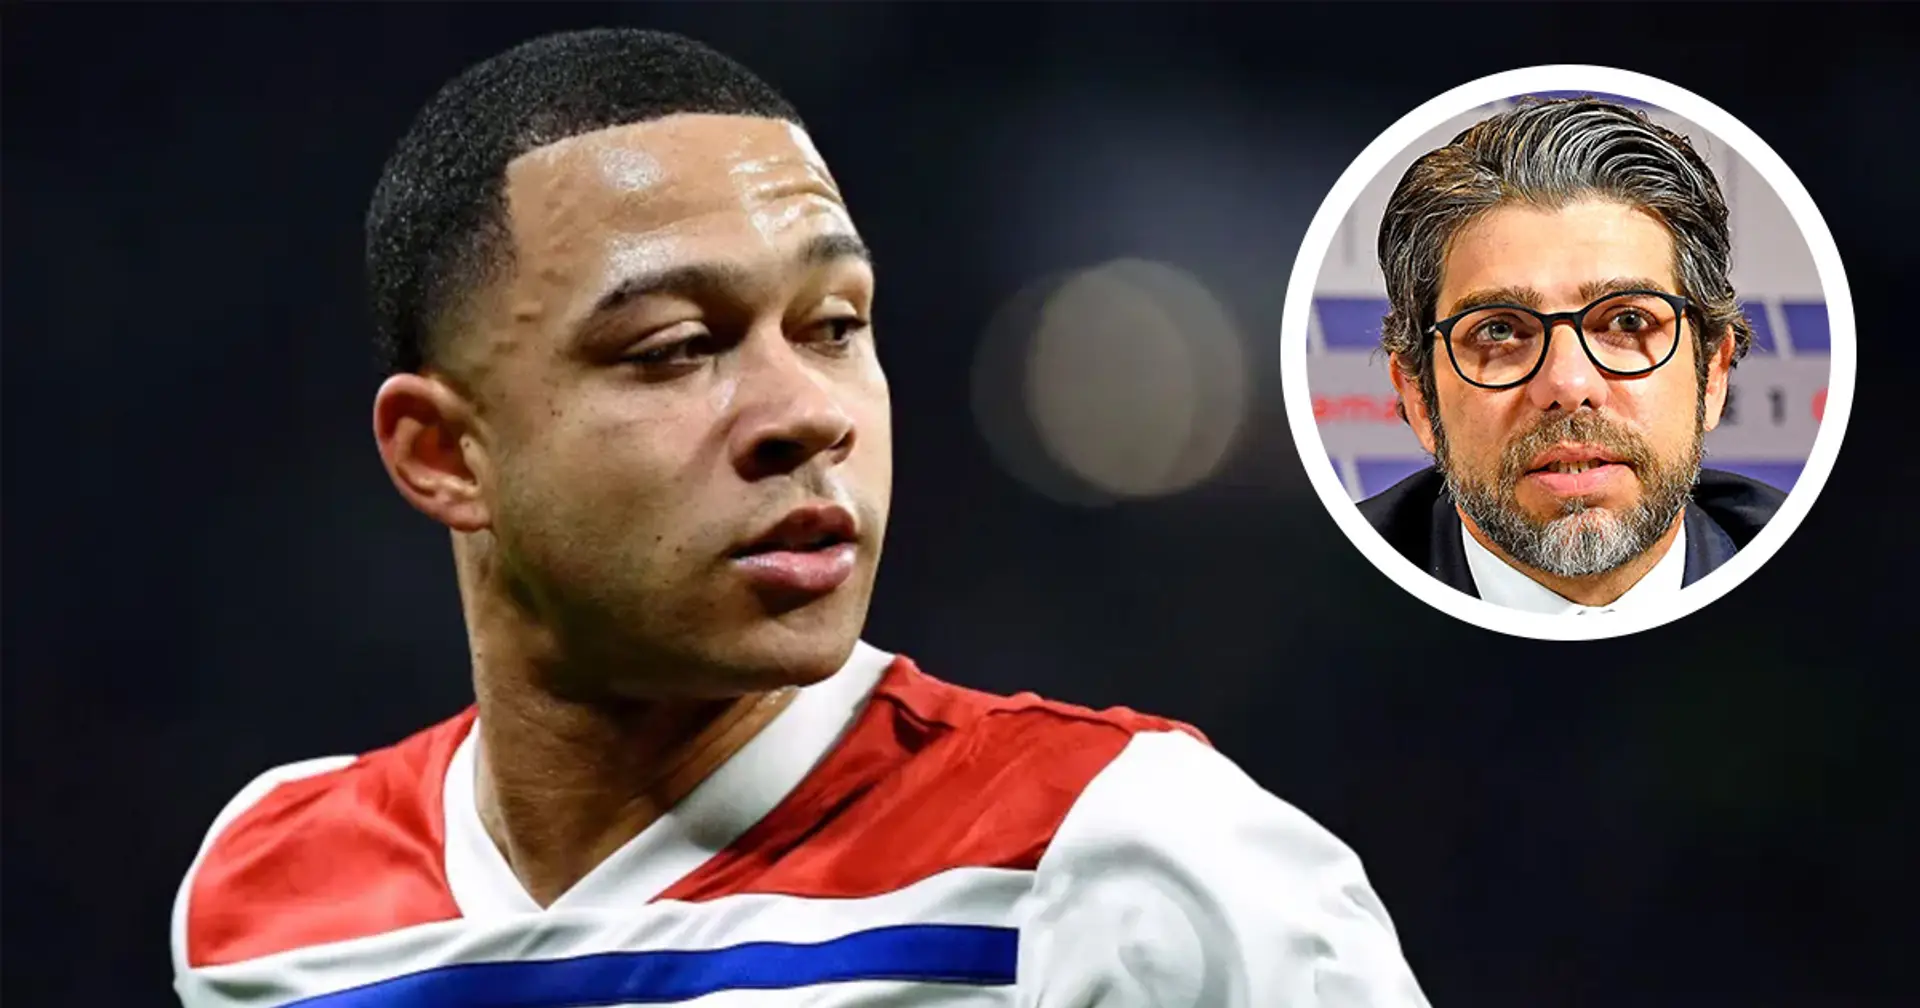 Lyon sporting director: I feel it's difficult to tie Depay up to new deal